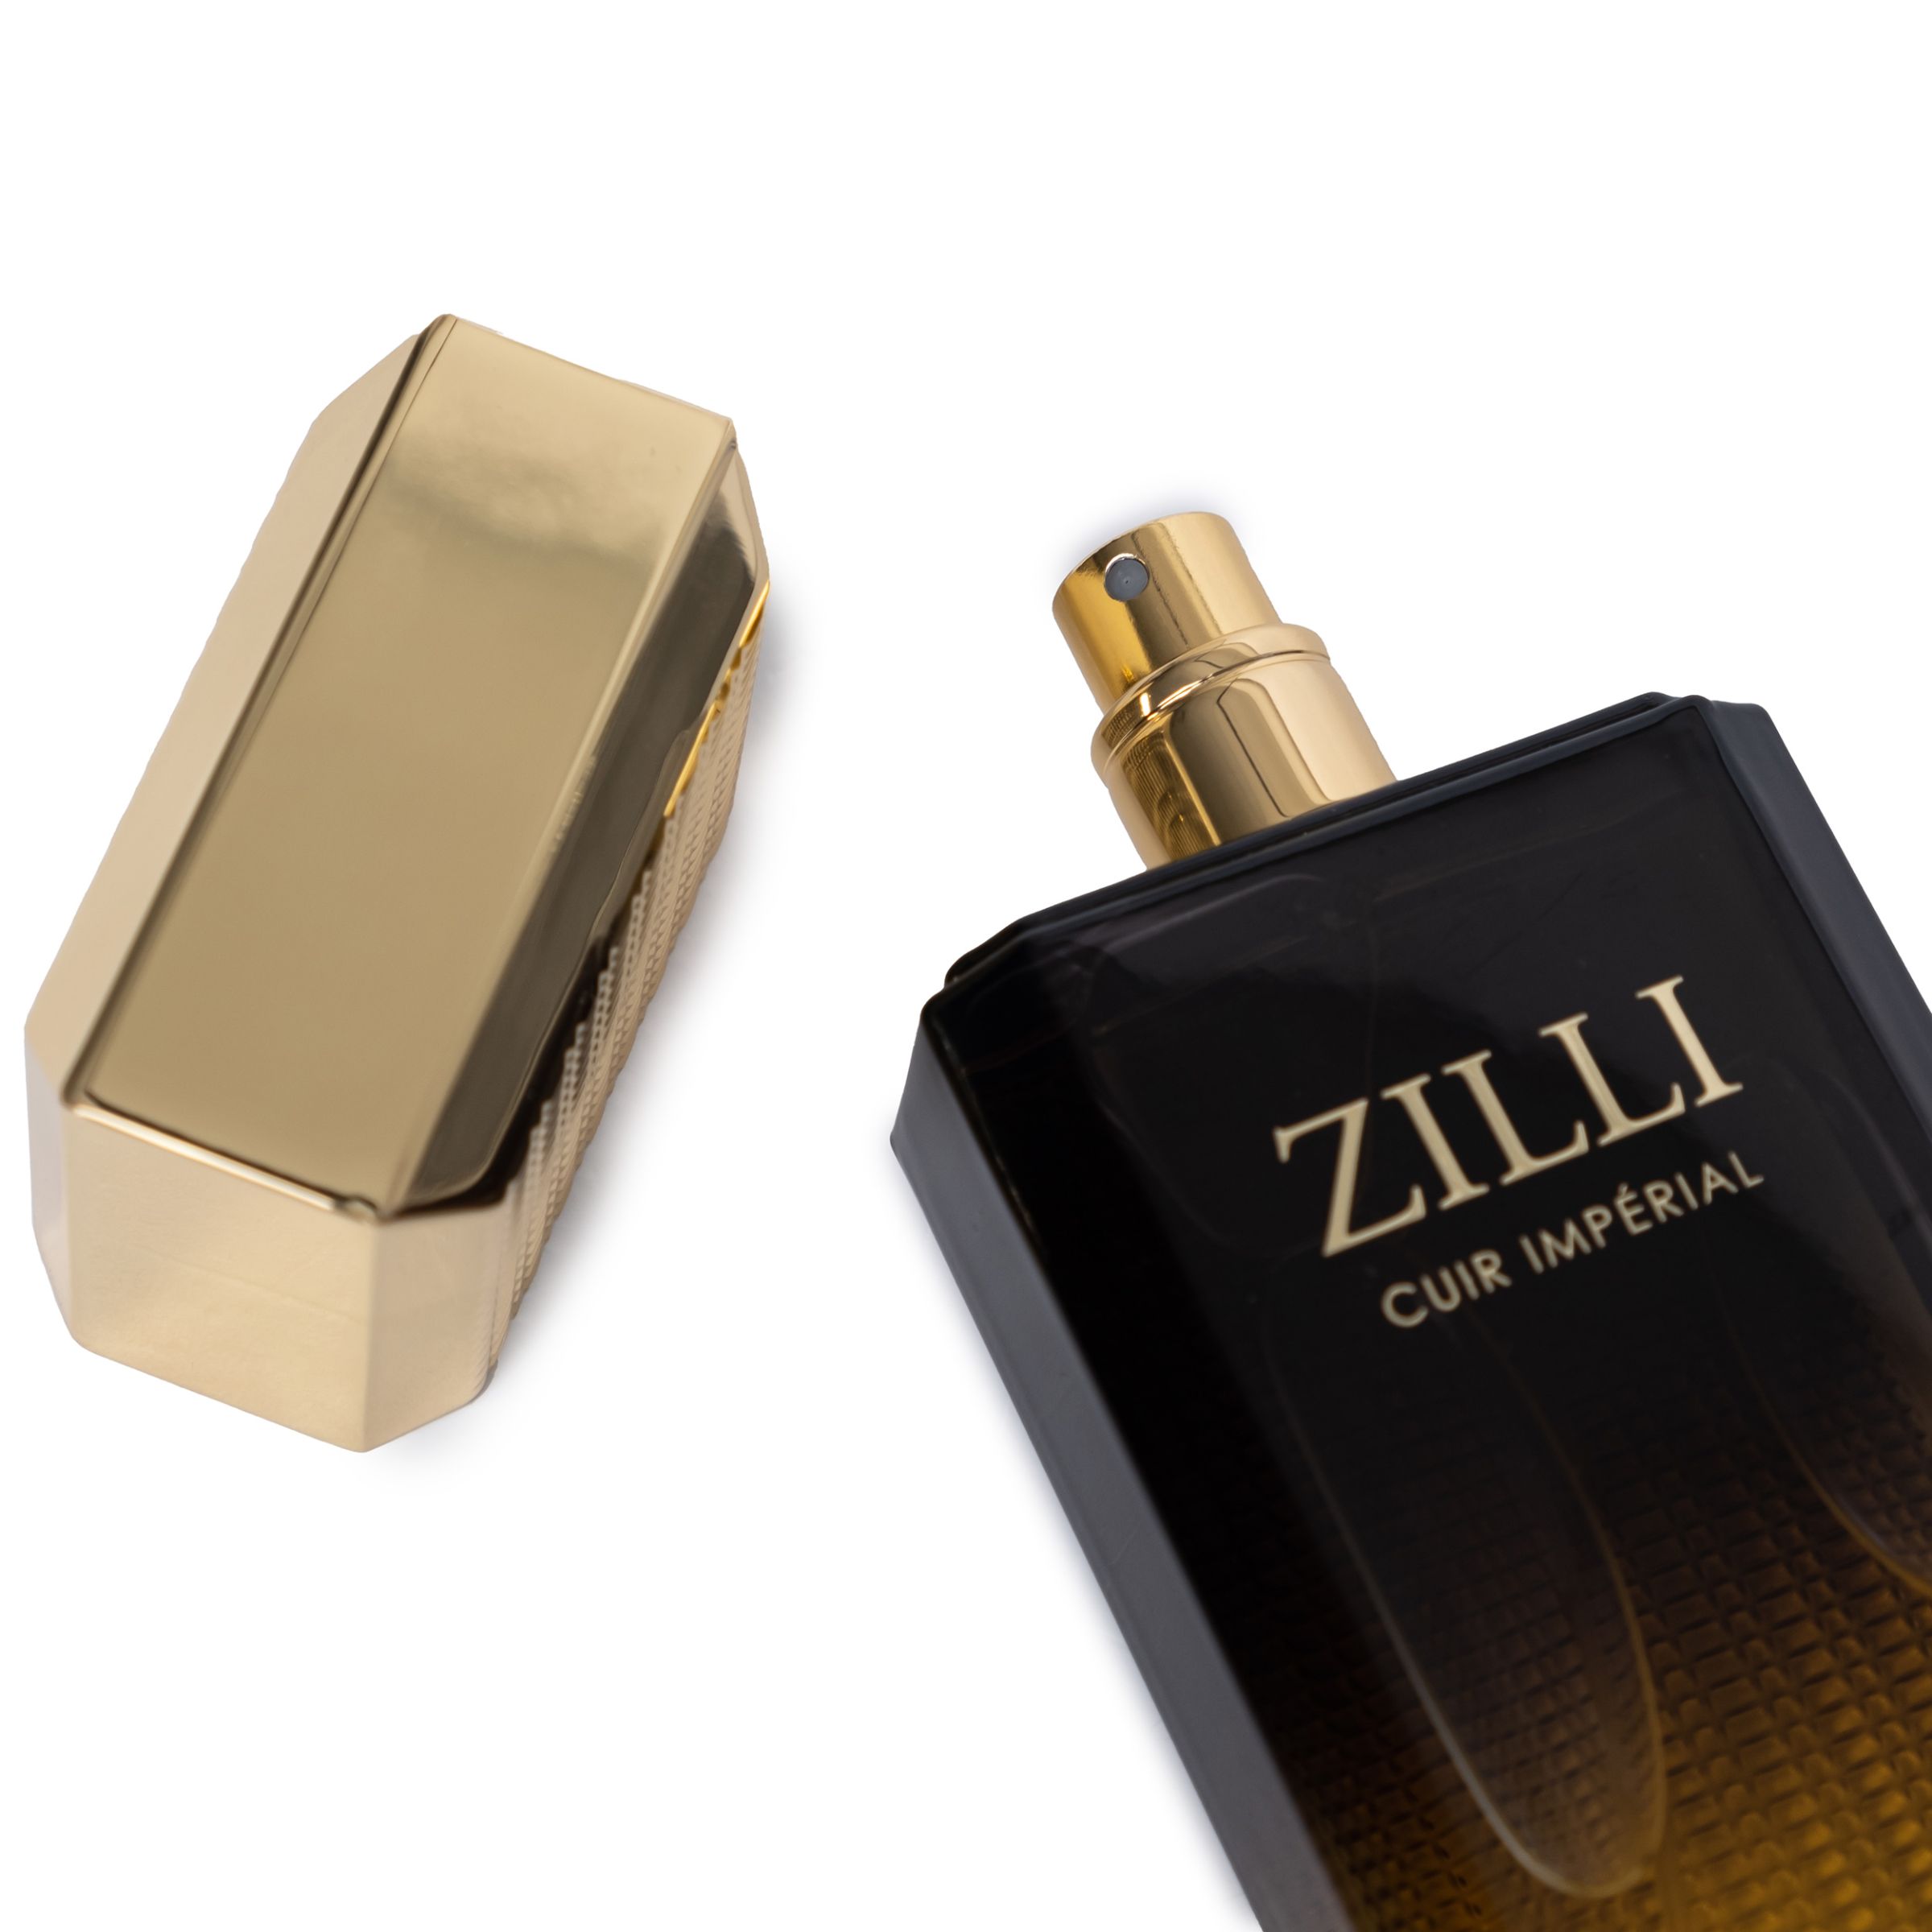 Парфюм Zilli CUIR IMPERIAL